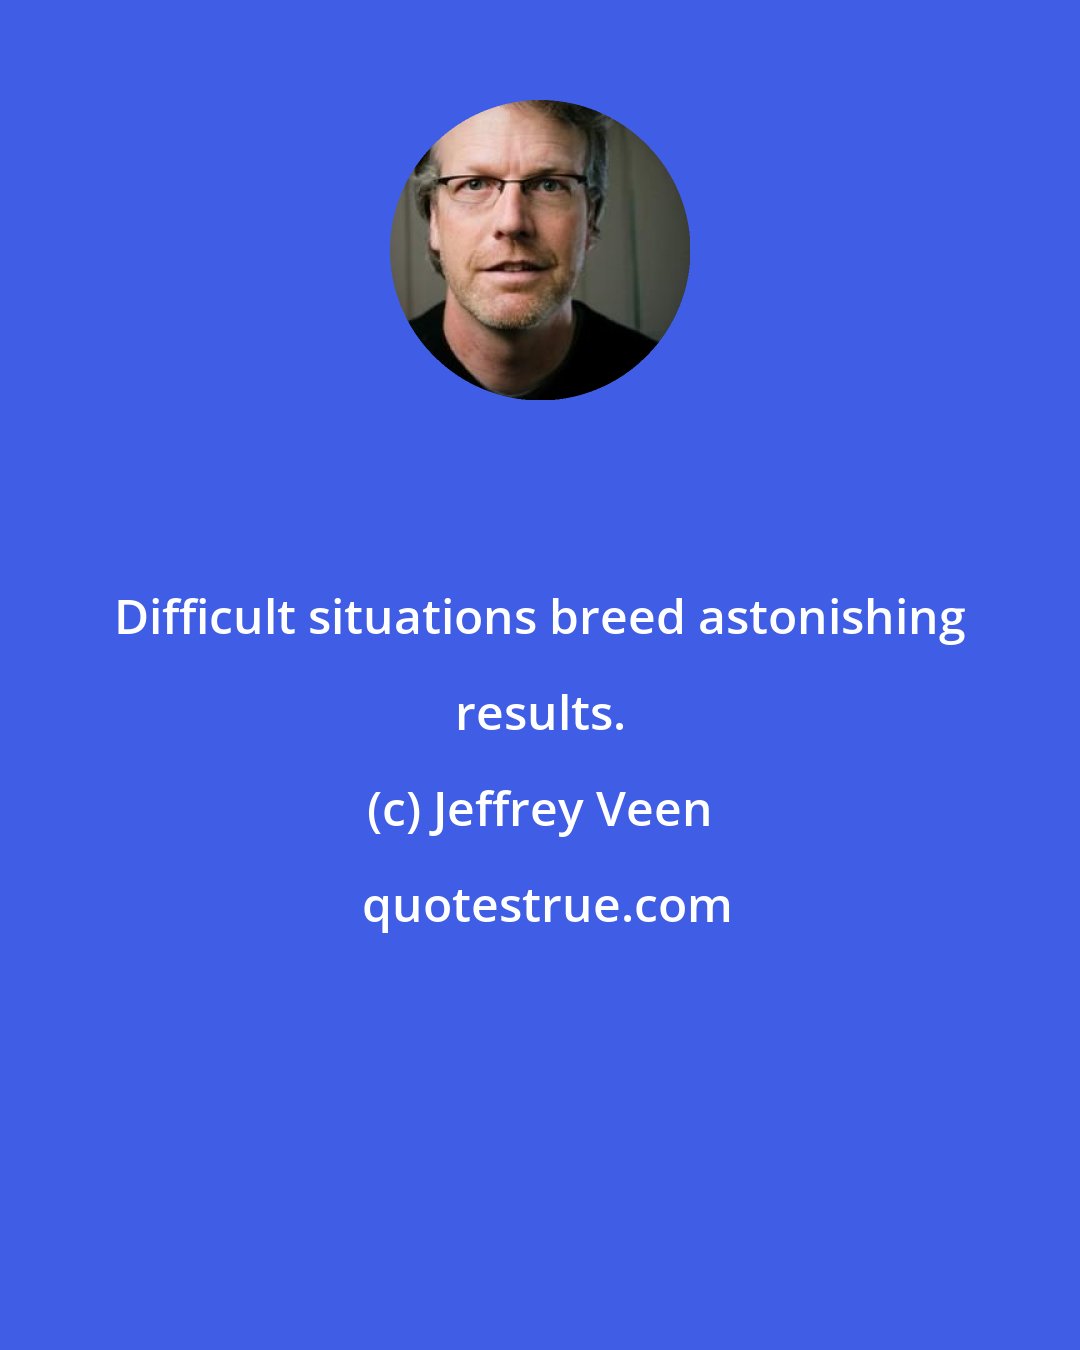 Jeffrey Veen: Difficult situations breed astonishing results.